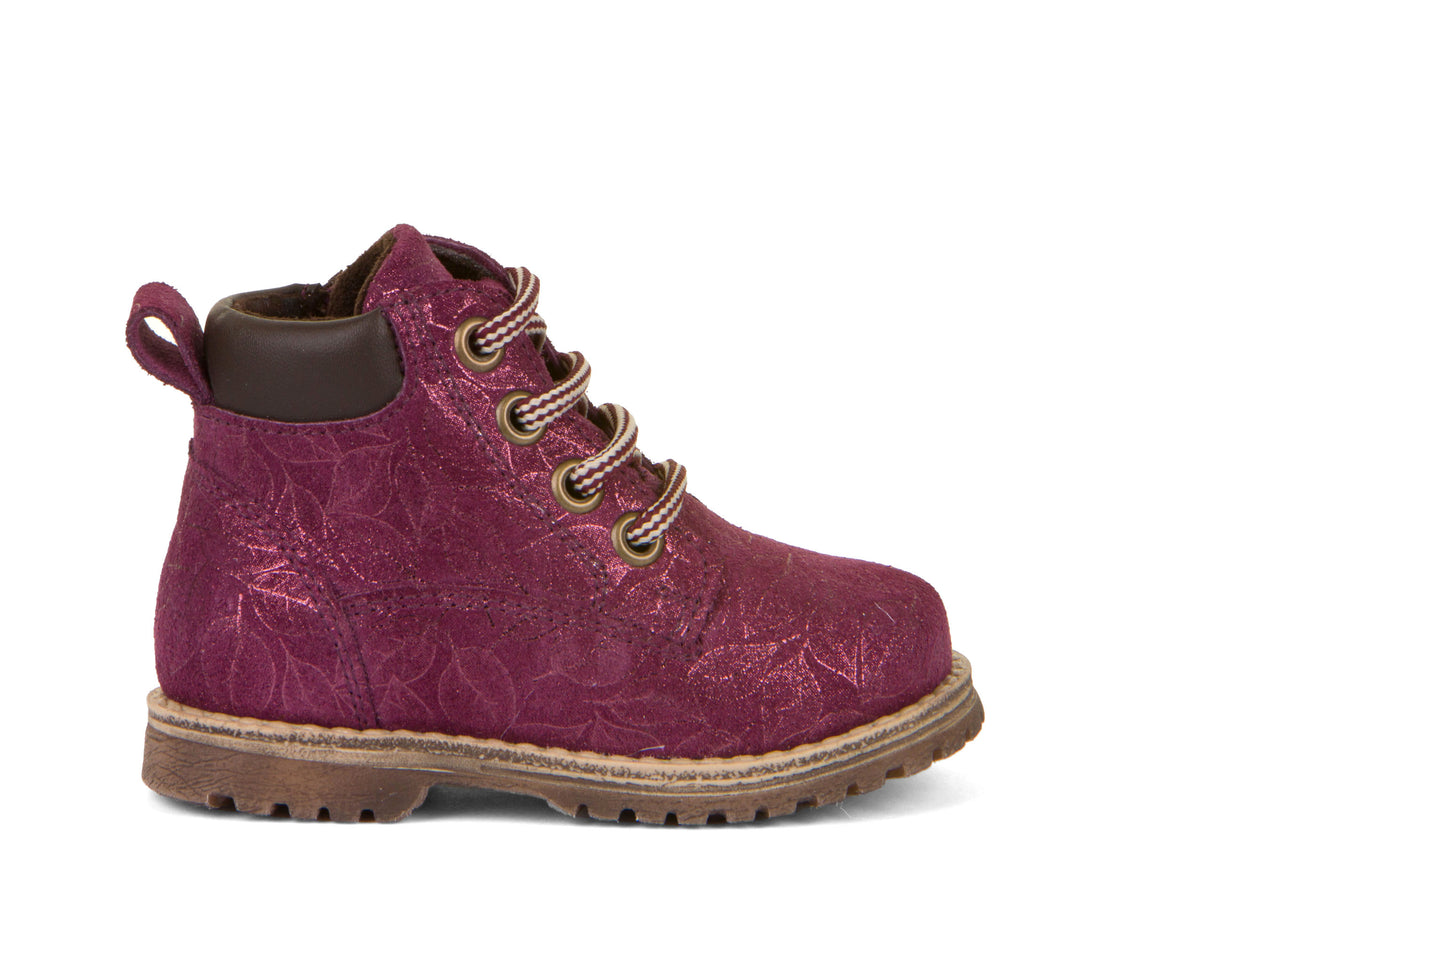 A girls boot by Froddo, style Mono G2110108-8 in Purple with lace, zip fastening. Right side view.